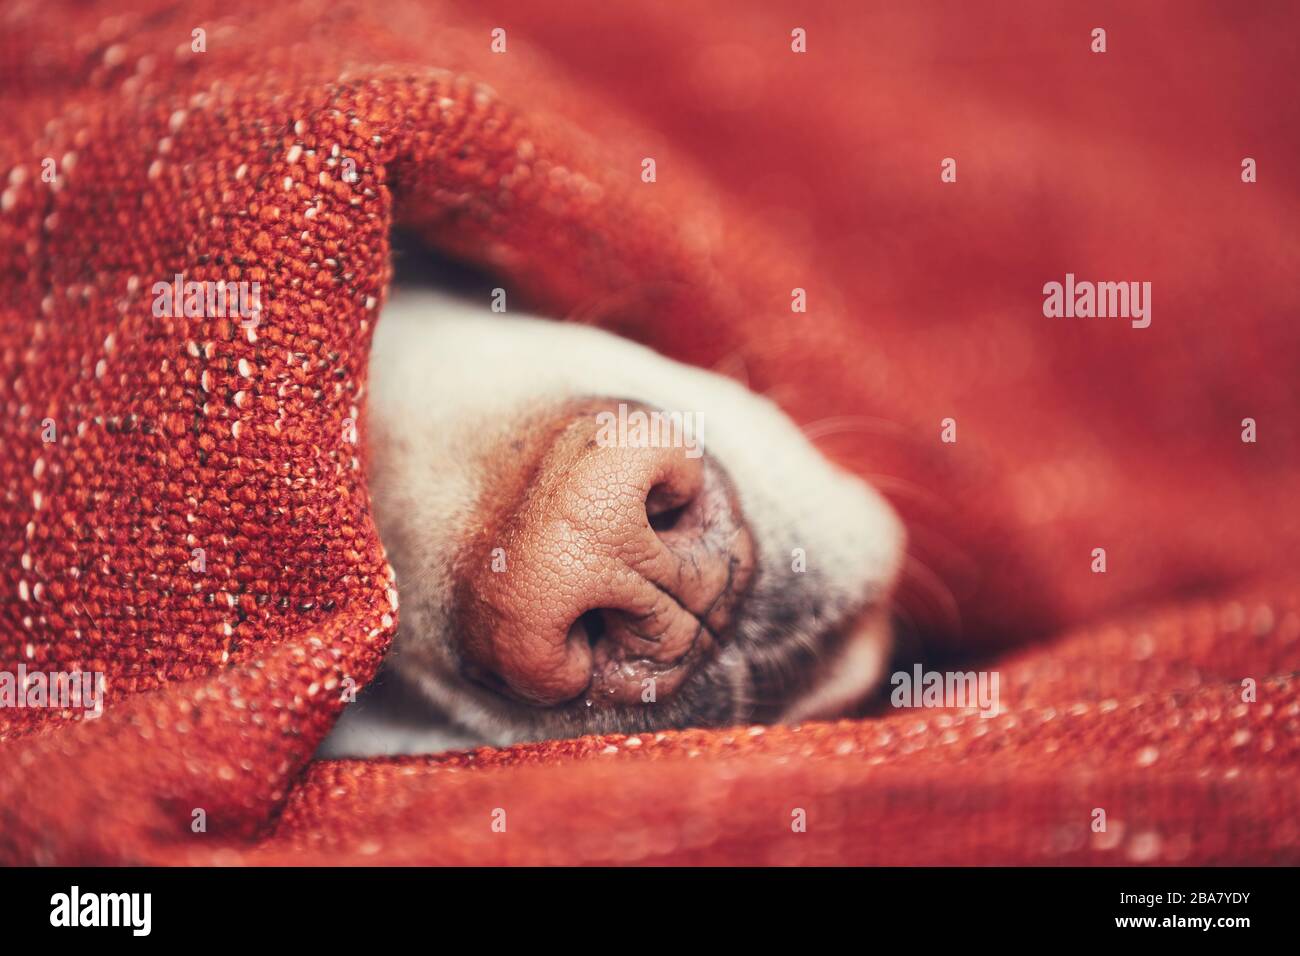 Close-up view of dog snout. Labrador retriever sleeping wrapped in blanket at home. Stock Photo